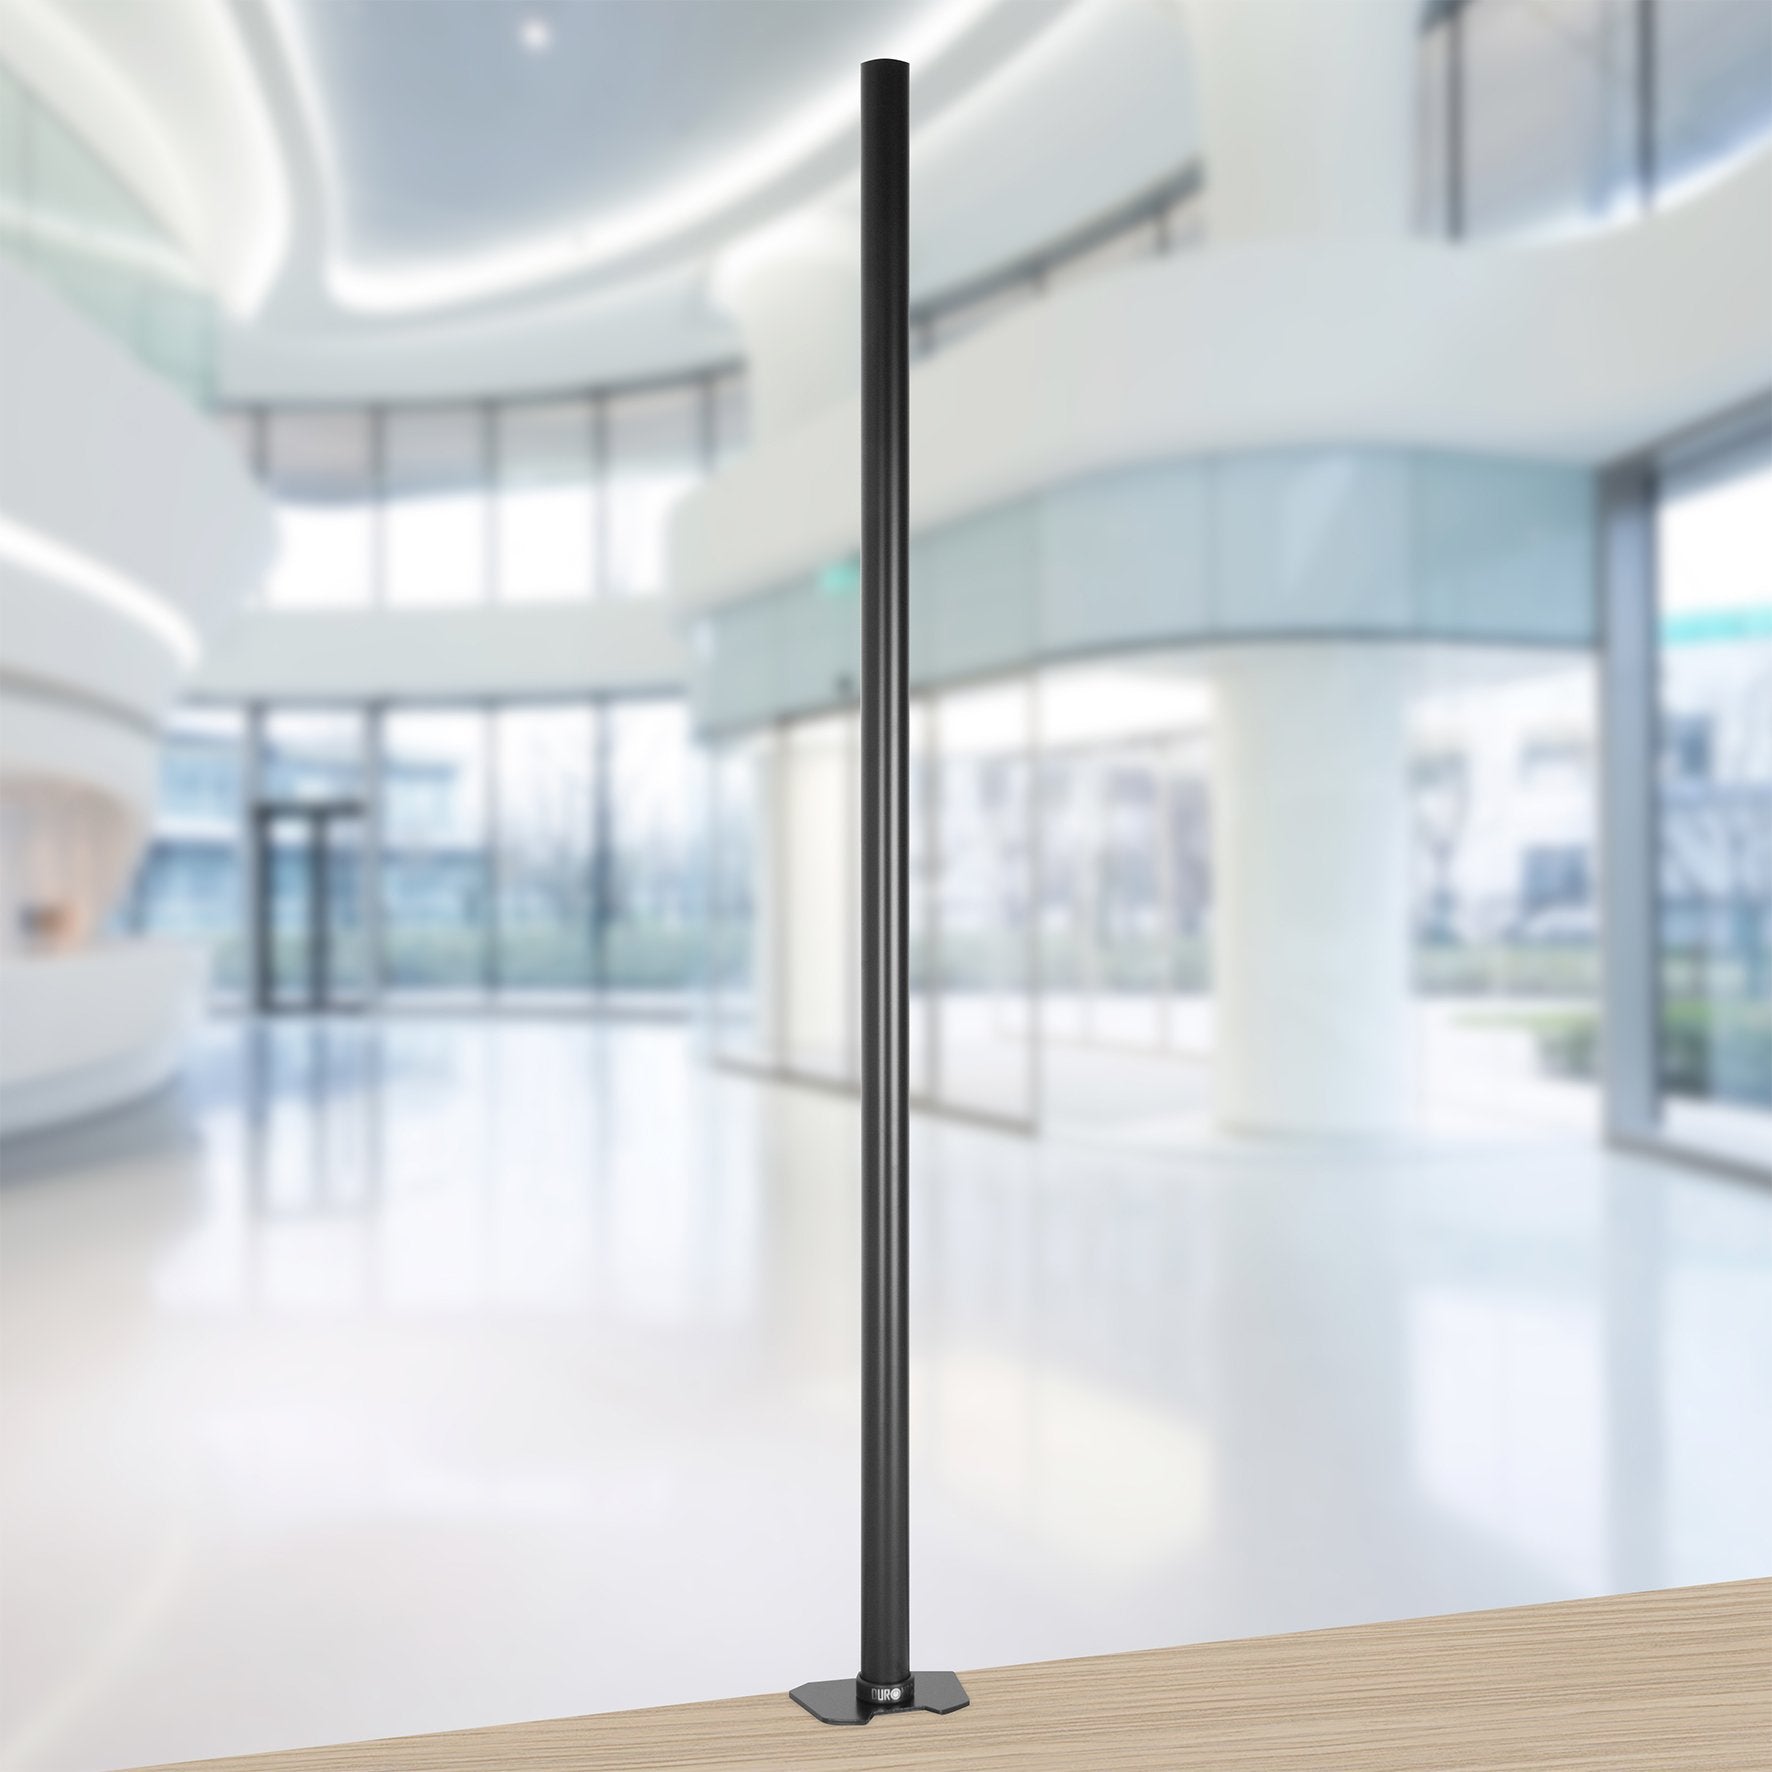 Duronic Monitor Stand Pole DM453 100cm BLACK | Compatible with All Duronic Monitor Desk Mount Arms | Black | Steel | Extra Extra Long | 1000mm Length | 32mm Diameter | Extra-Wide Clamp Included